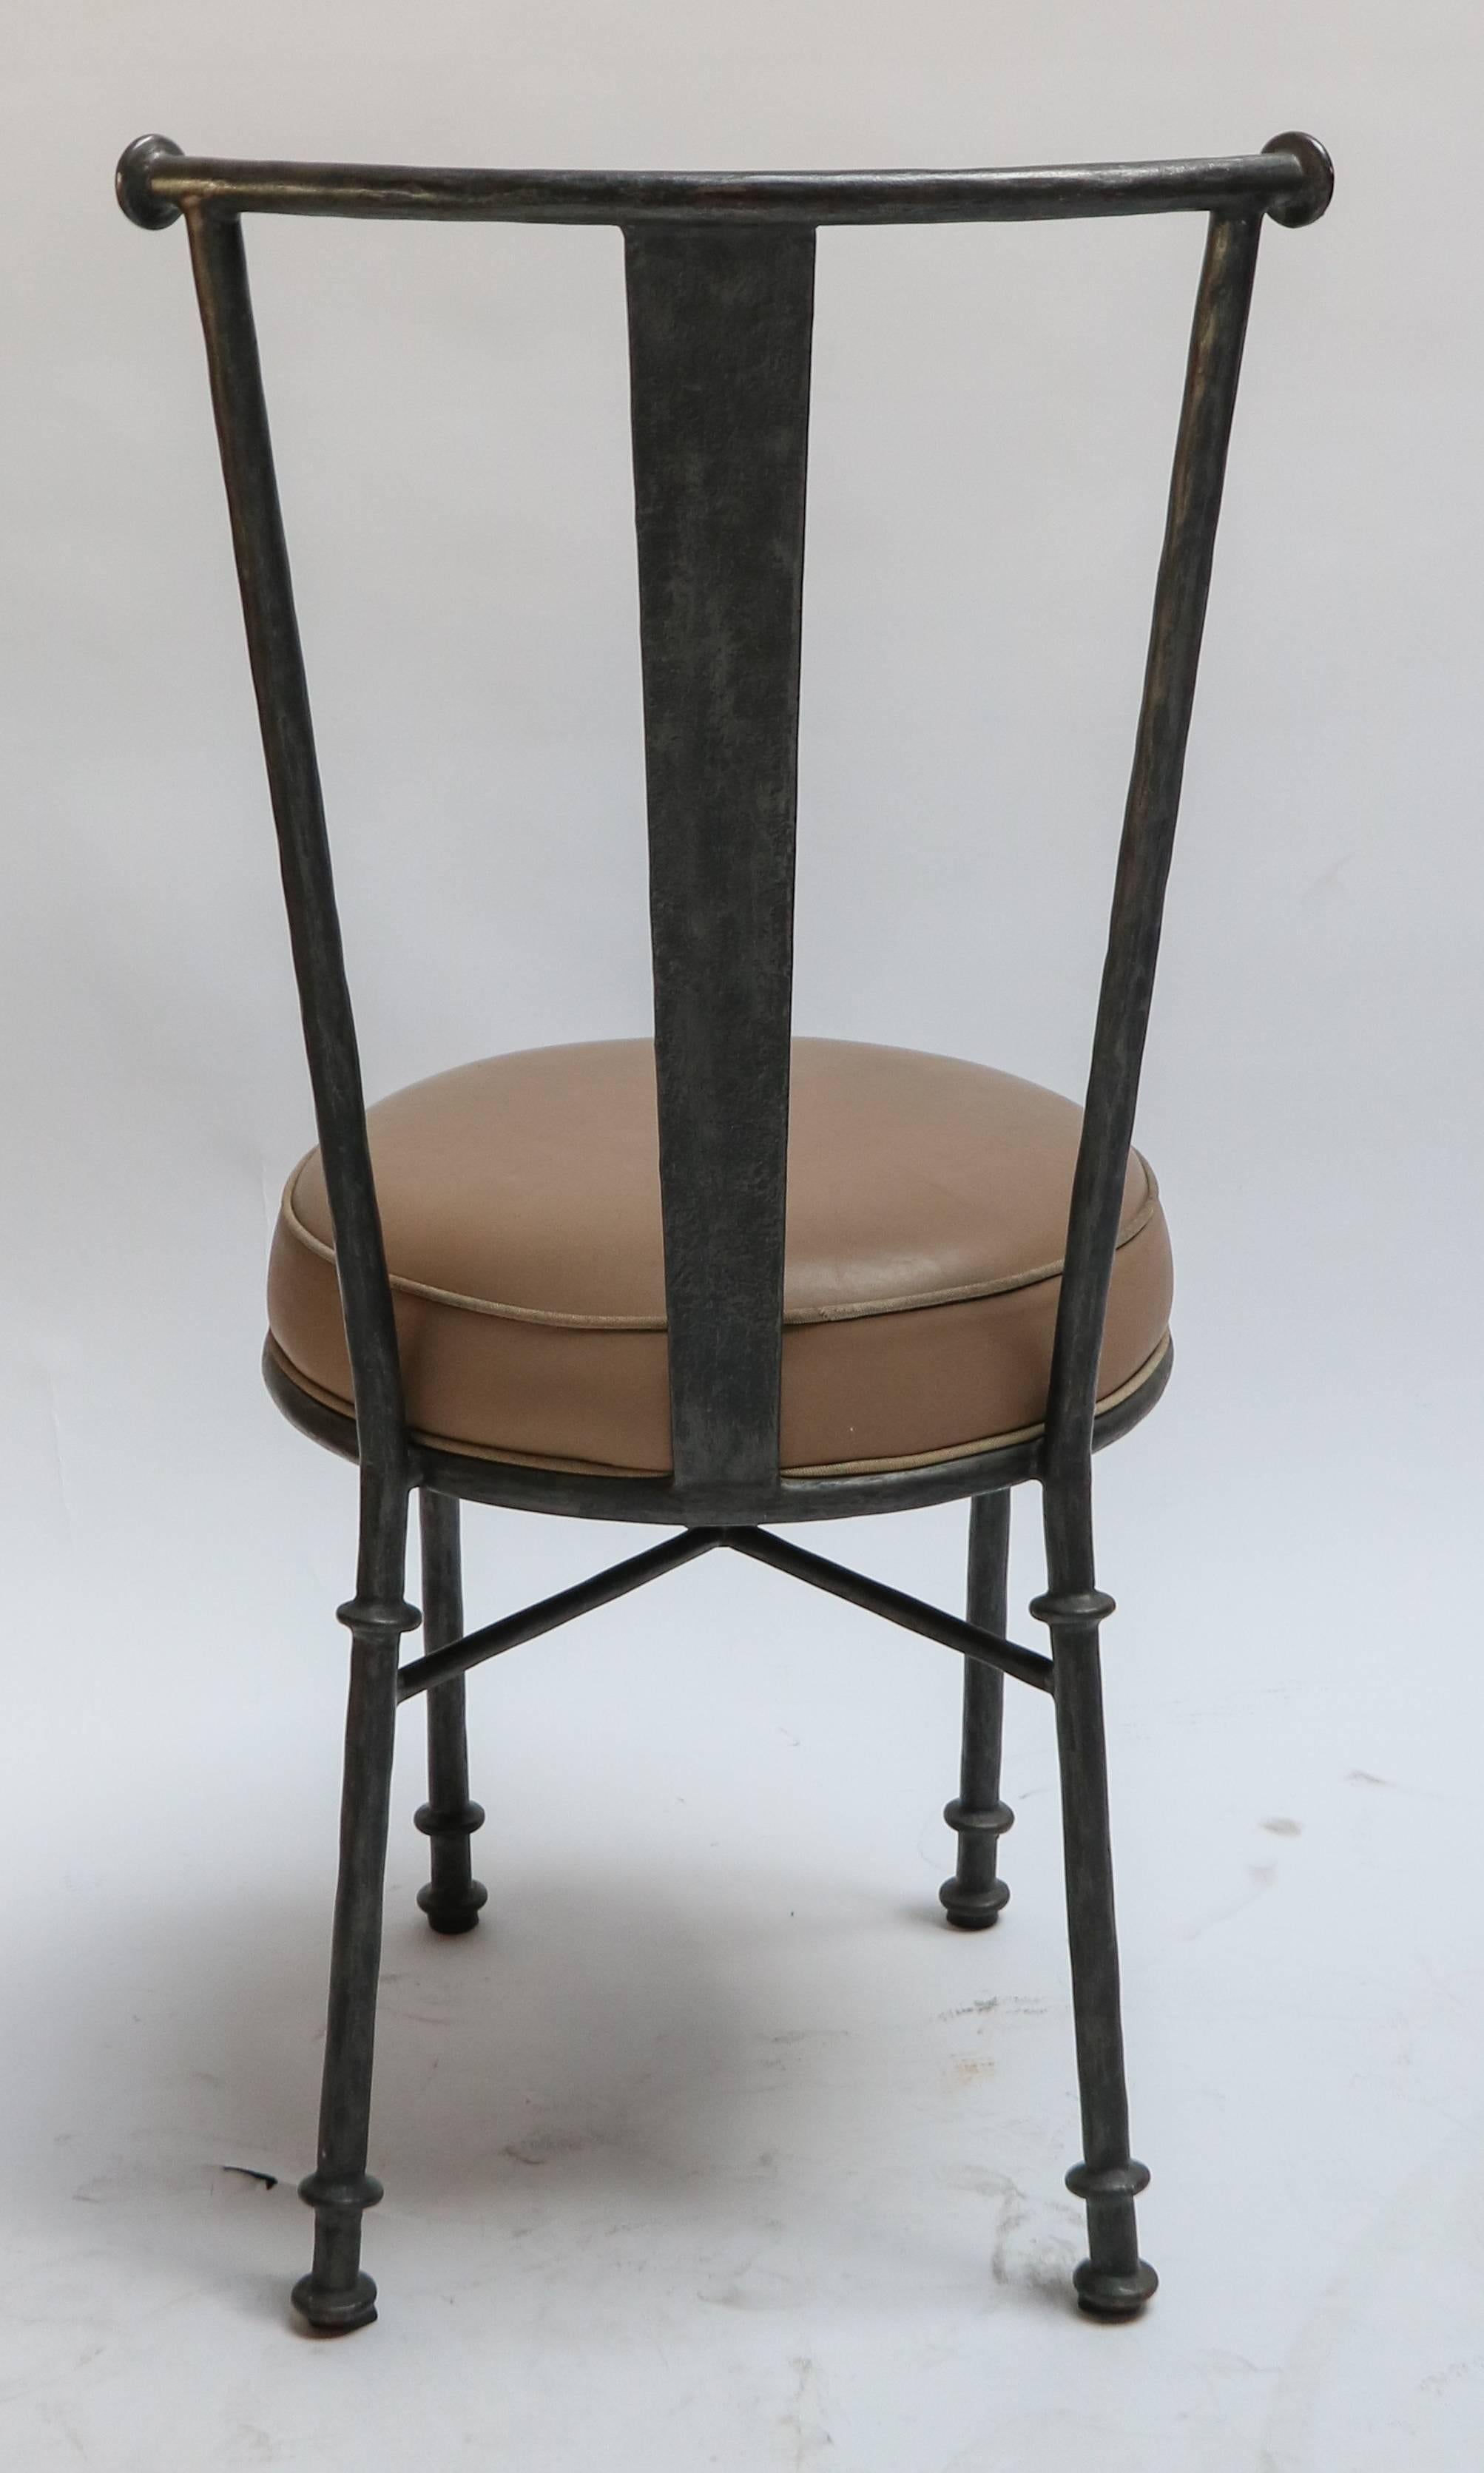 Set of 1980s handcrafted iron chairs, eight side chairs upholstered in brown / tan leather.